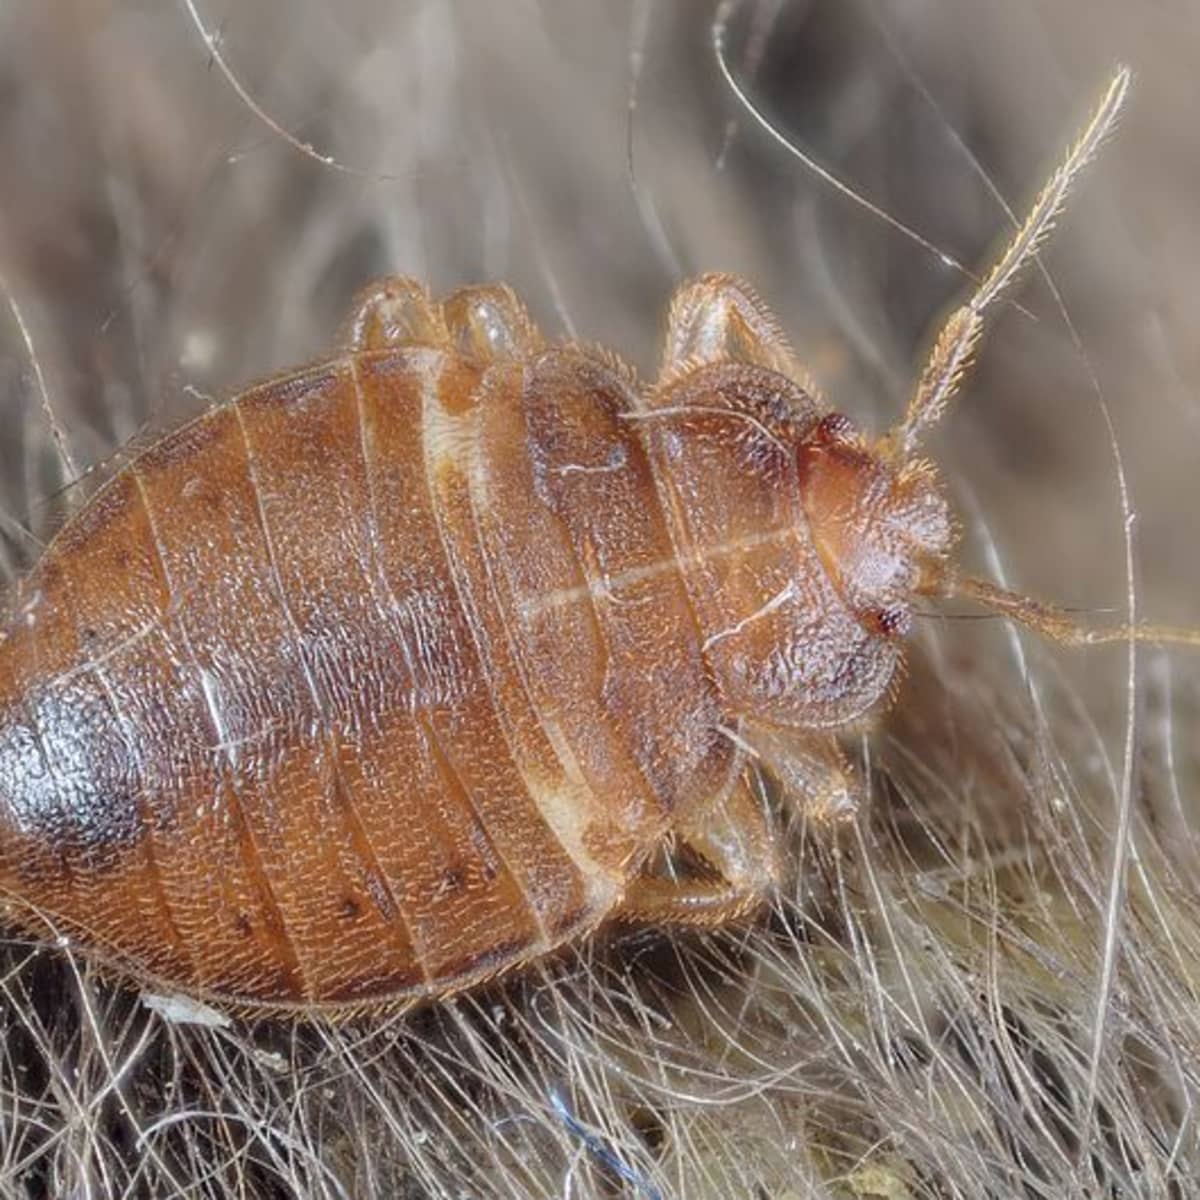 How to Get Rid of Bed Bugs in Clothes by Georgie Lavin